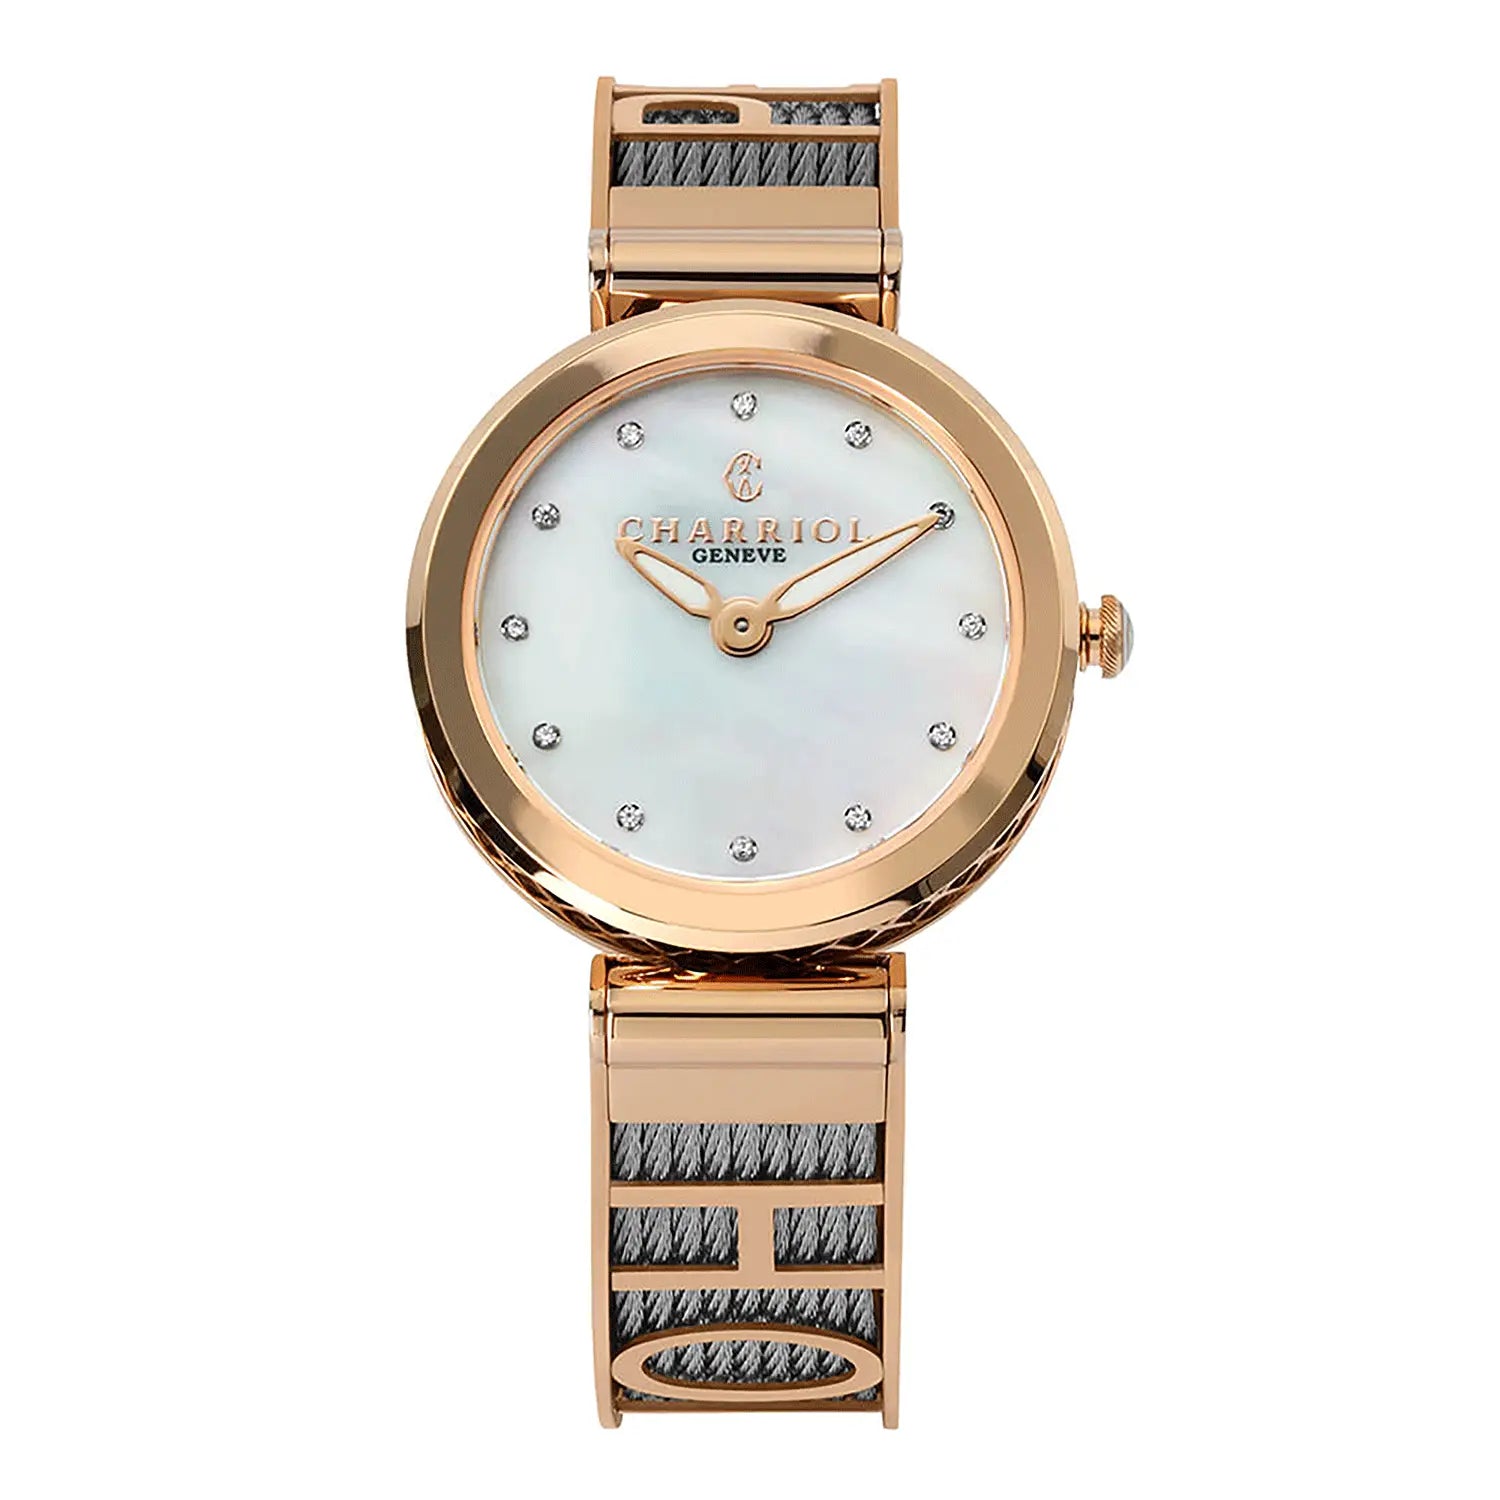 FOREVER YOURS, 32MM, QUARTZ CALIBRE, MOTHER-OF-PEARL WITH 12 DIAMONDS DIAL, ROSE GOLD PVD BEZEL, STEEL CABLE BRACELET